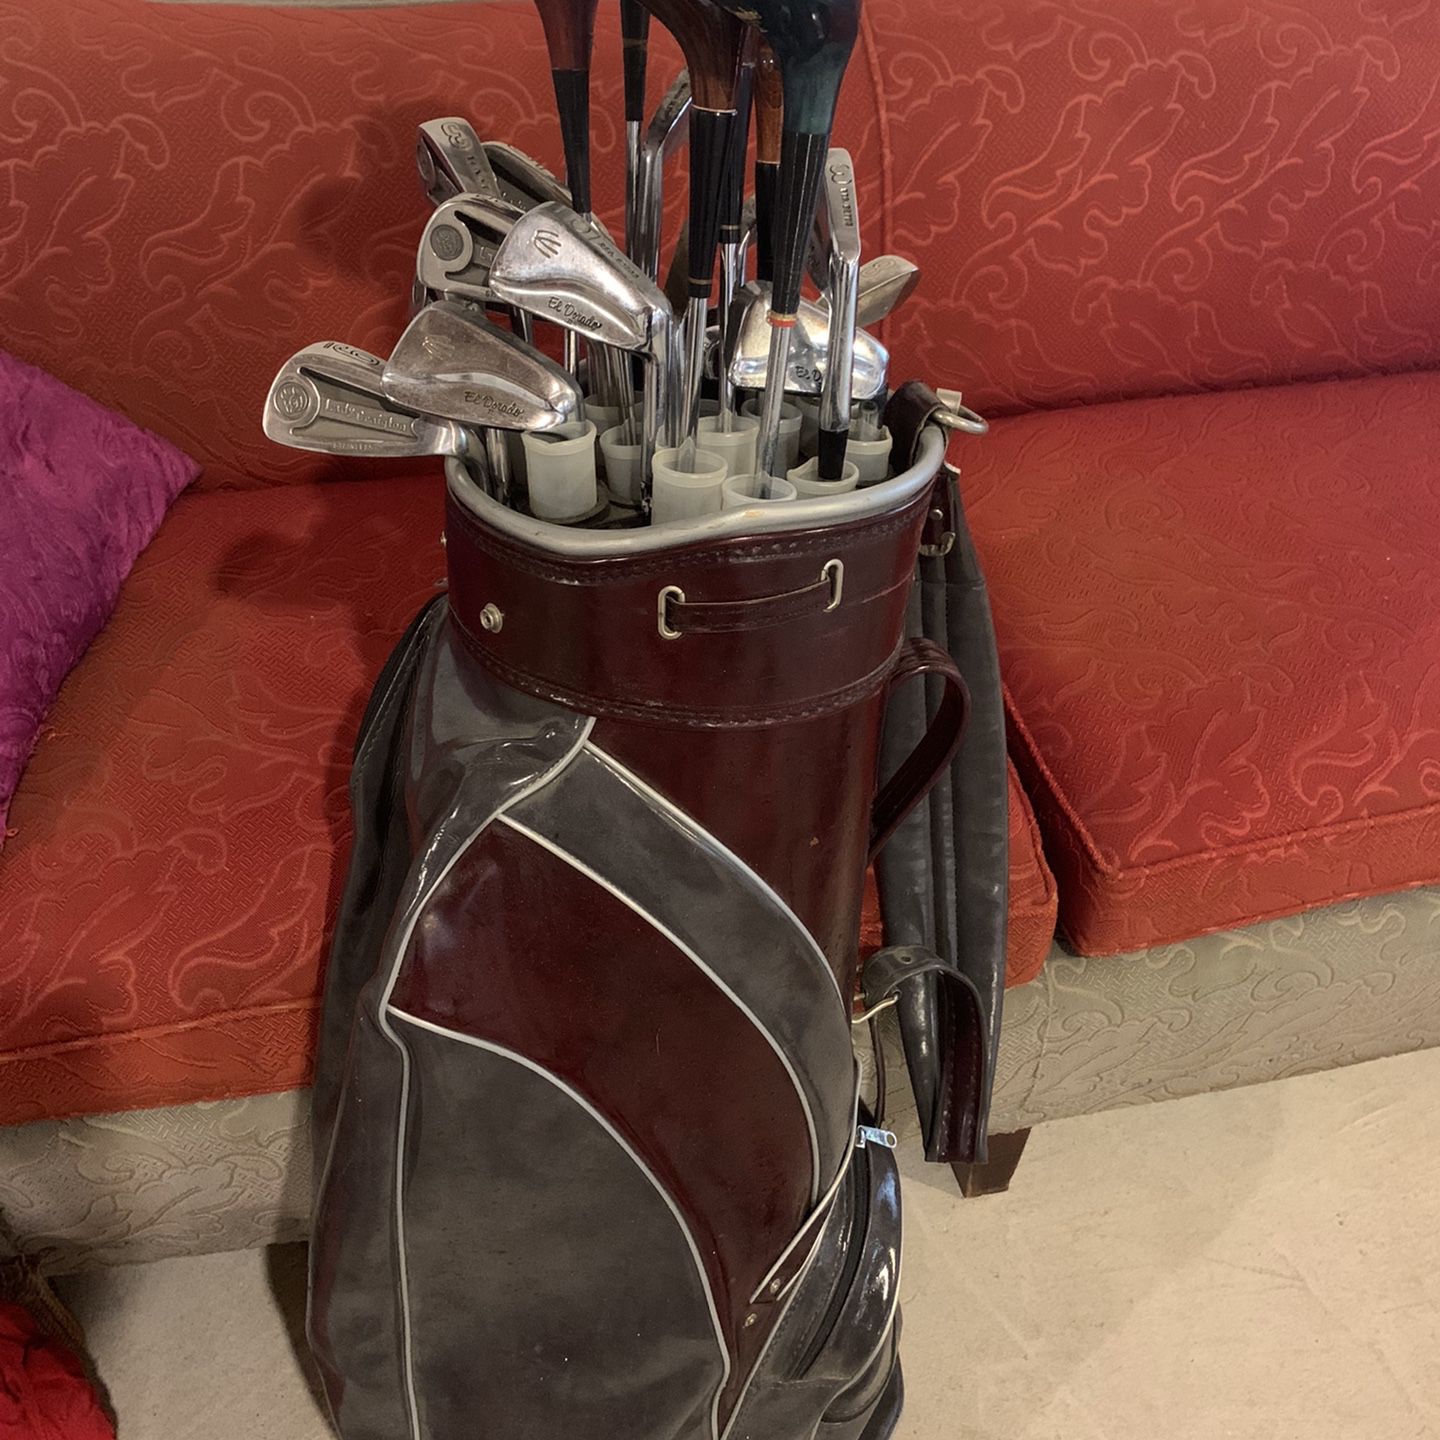 Vintage Golf Clubs with Bags  Vintage golf clubs, Golf bags